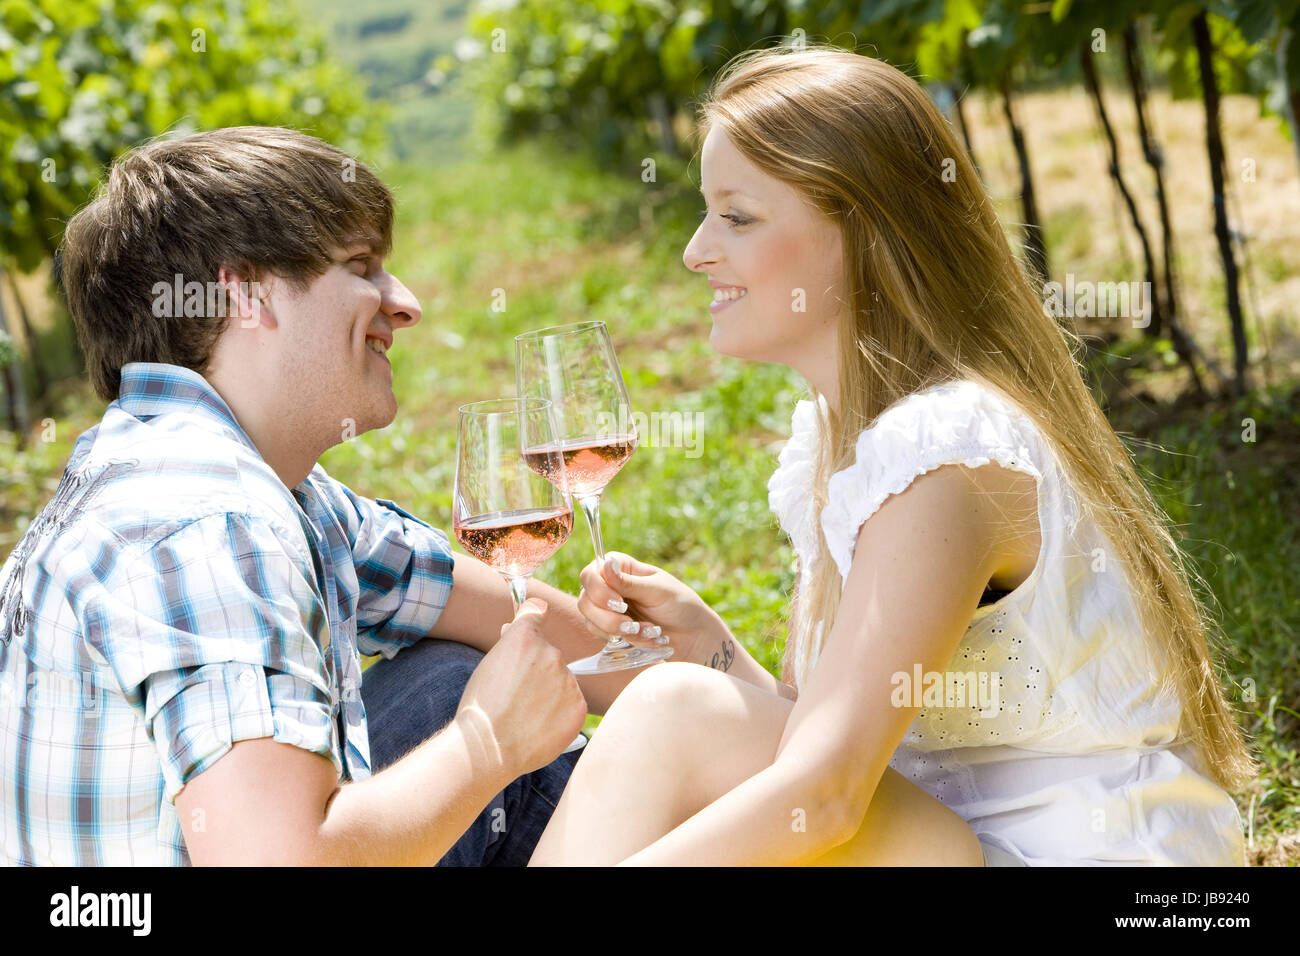 couple at a picnic in vineyard Stock Photo